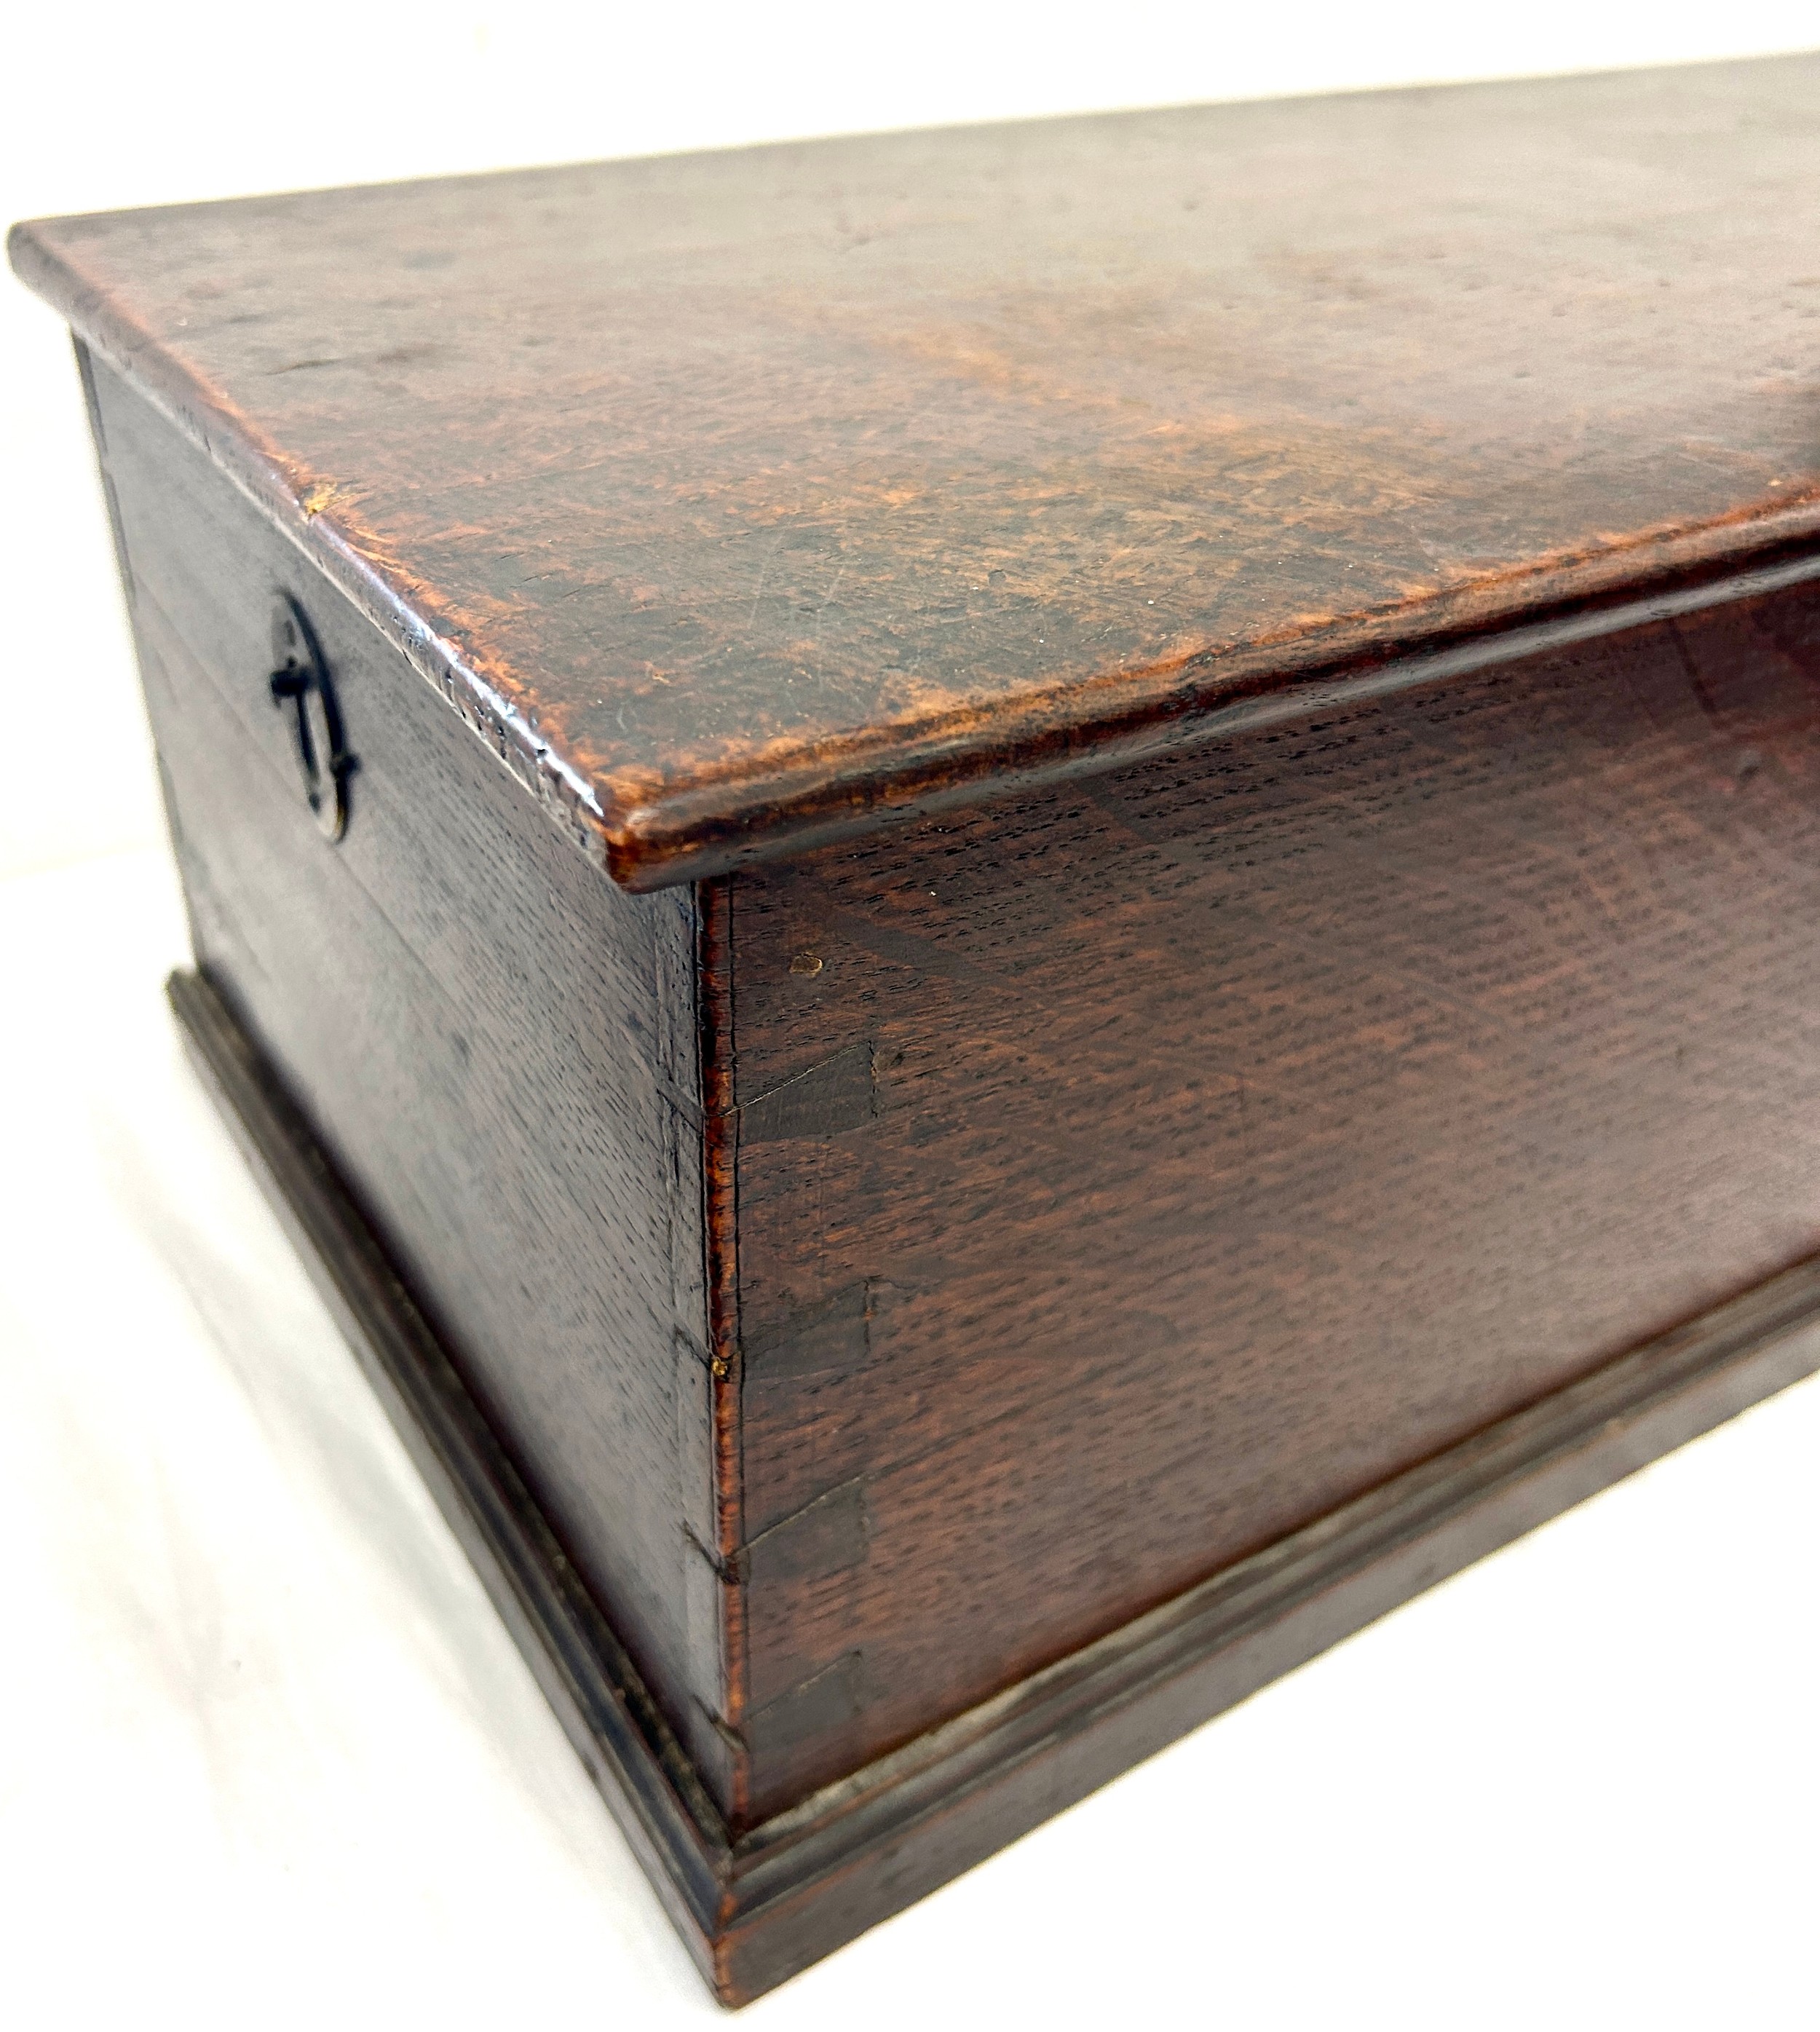 Period bible box, 2 locks, however no keys, approximate measurements: Height 7.5 inches, Width 22. - Image 3 of 4